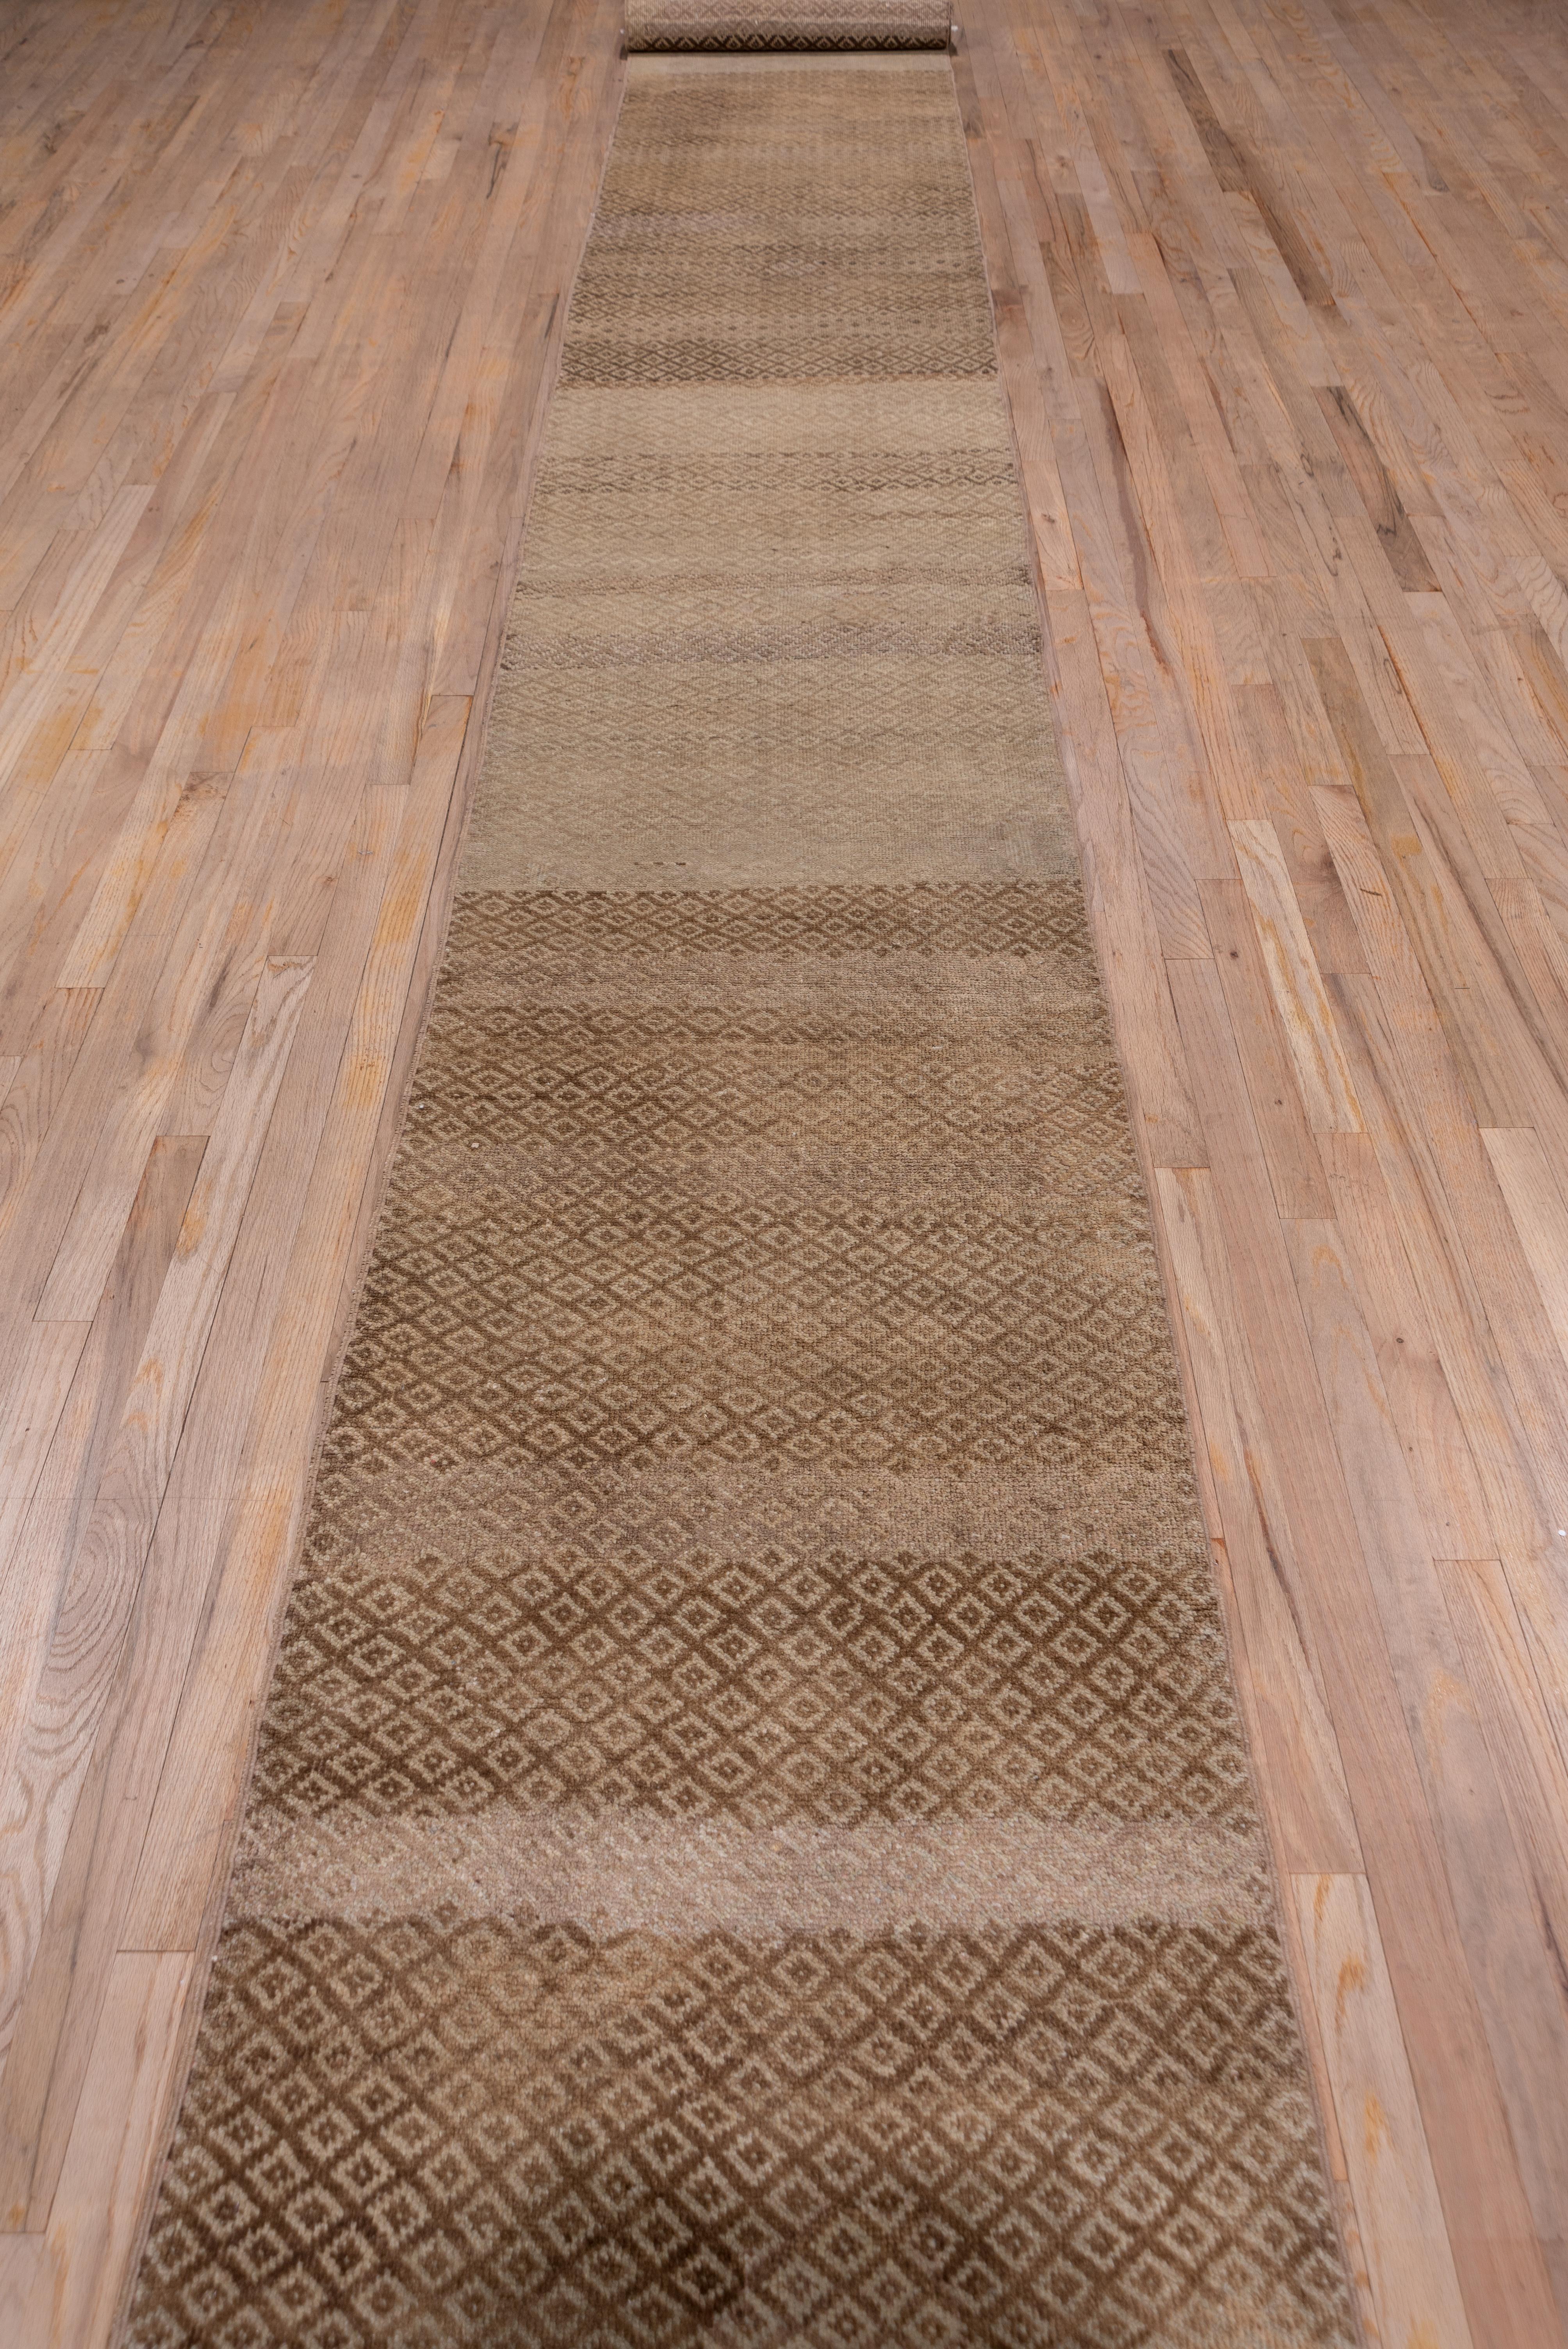 This good pile, borderless rustic Turkish runner displays an abrashed small lozenge pattern on a rust red to light buff field.